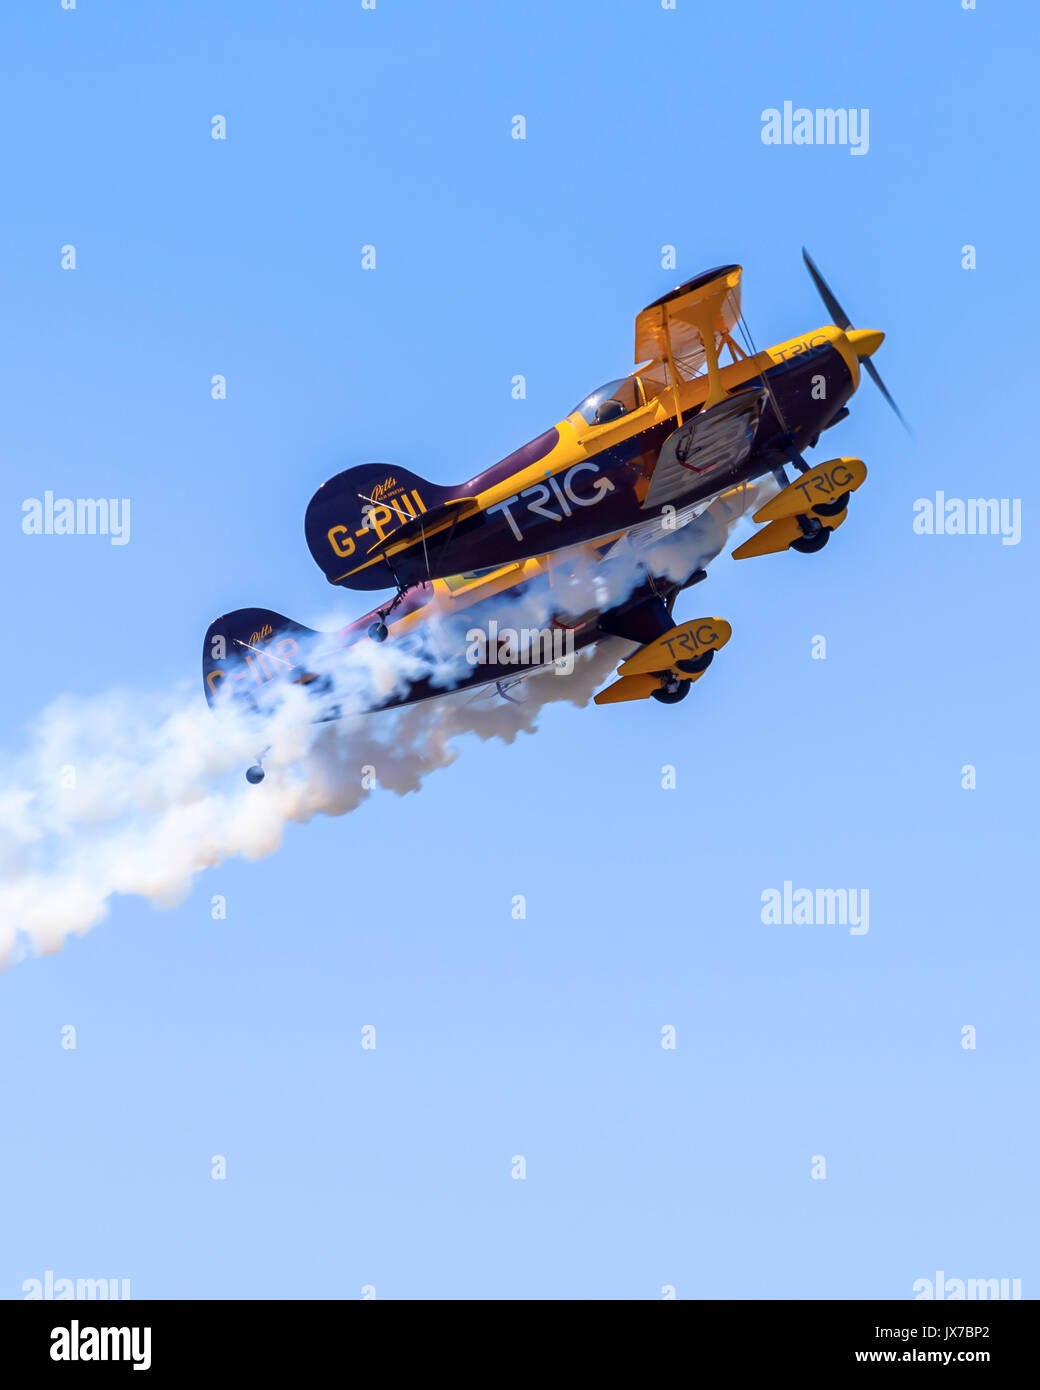 Trig Aerobatic Team performing close-formation aerobatic stunts in their Pitts Special S-1D biplanes Stock Photo